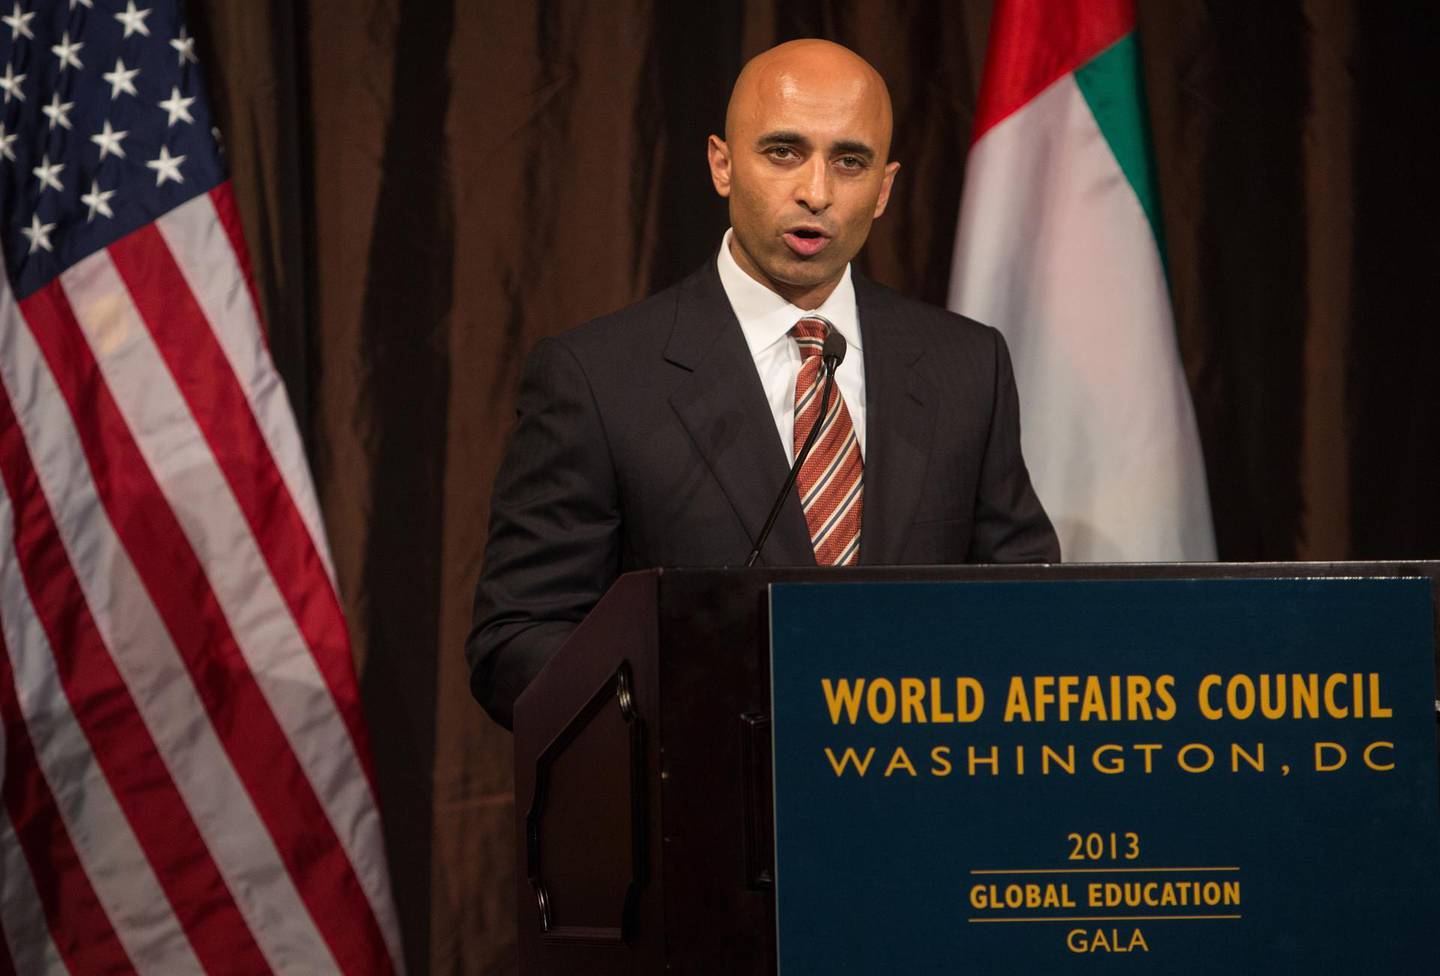 UAE Ambassador to the United States,  Yousef al Otaiba, accepts the distinguished diplomatic service award, at the World Affairs Council Global Education Gala, in Washington, DC, March 7, 2013.